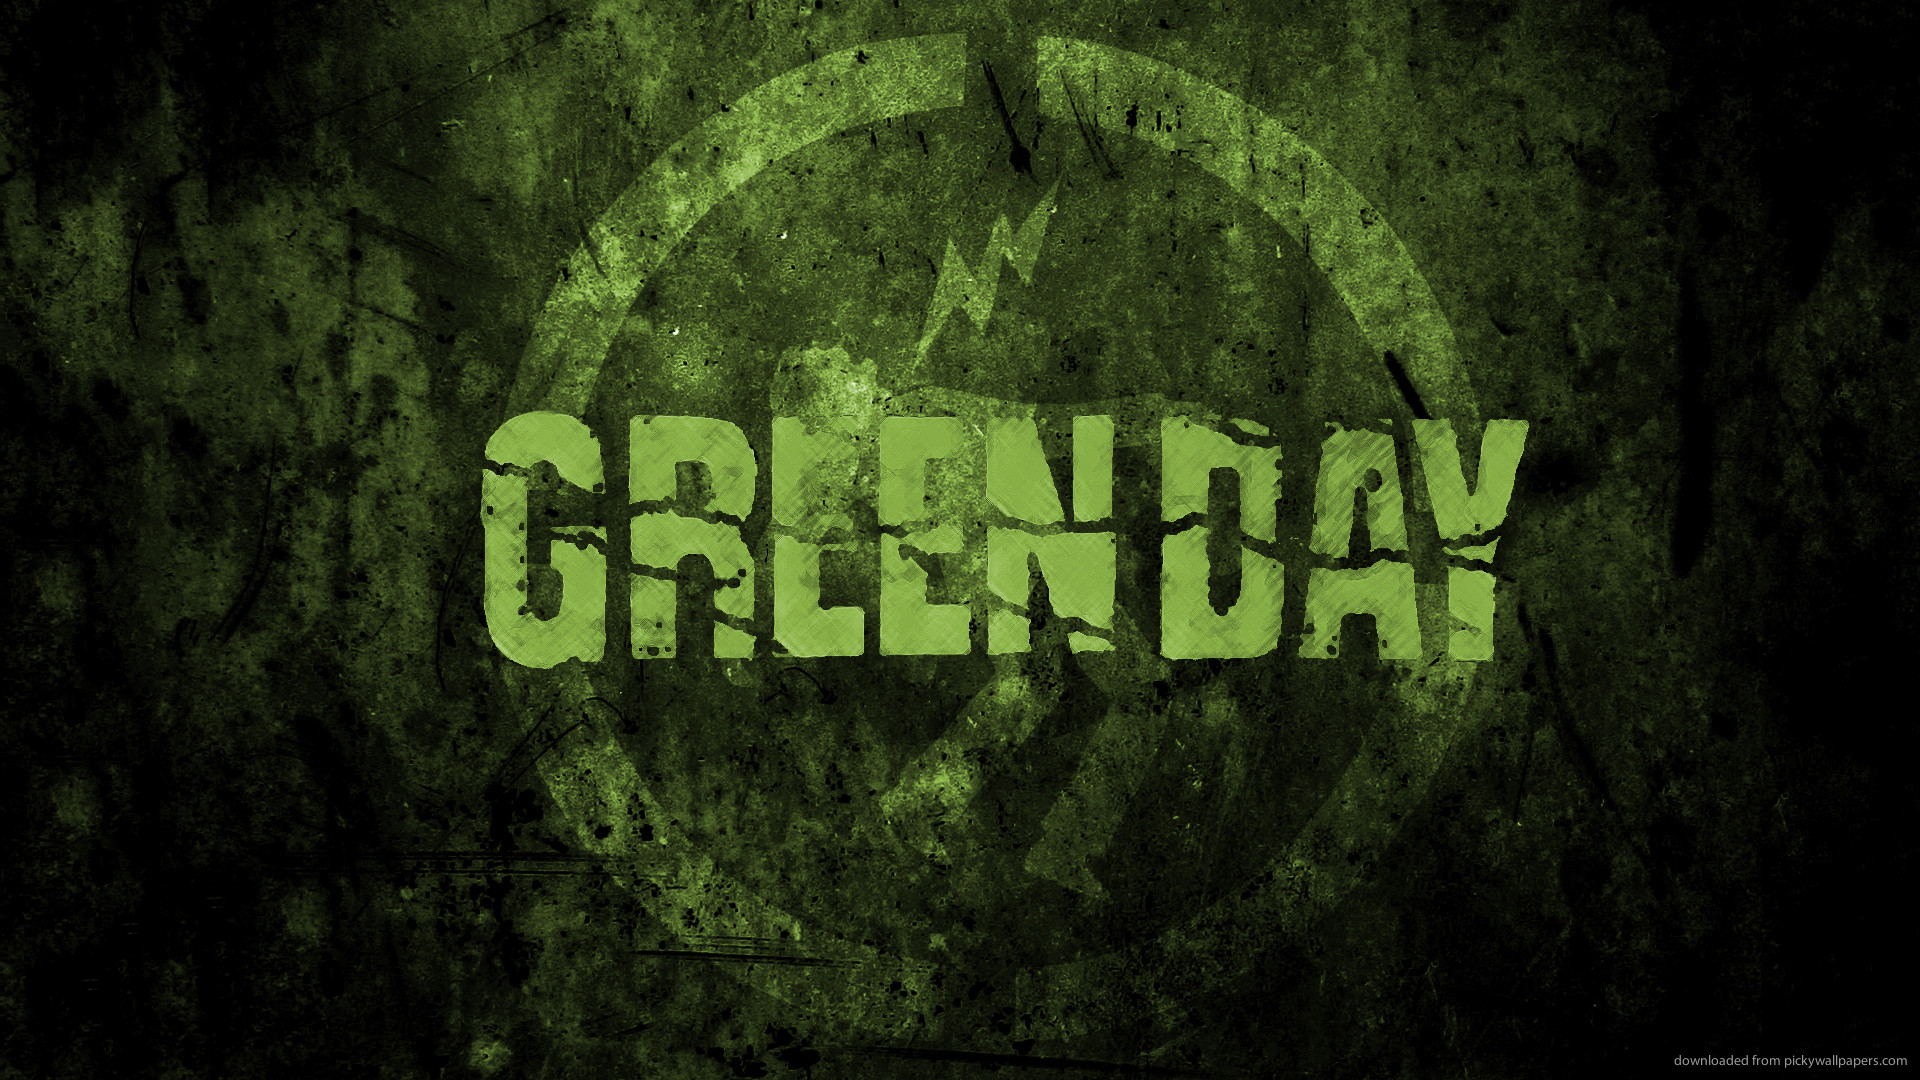 1920x1080 Green Day Picture For iPhone, Blackberry, iPad, Green Day Screensaver .